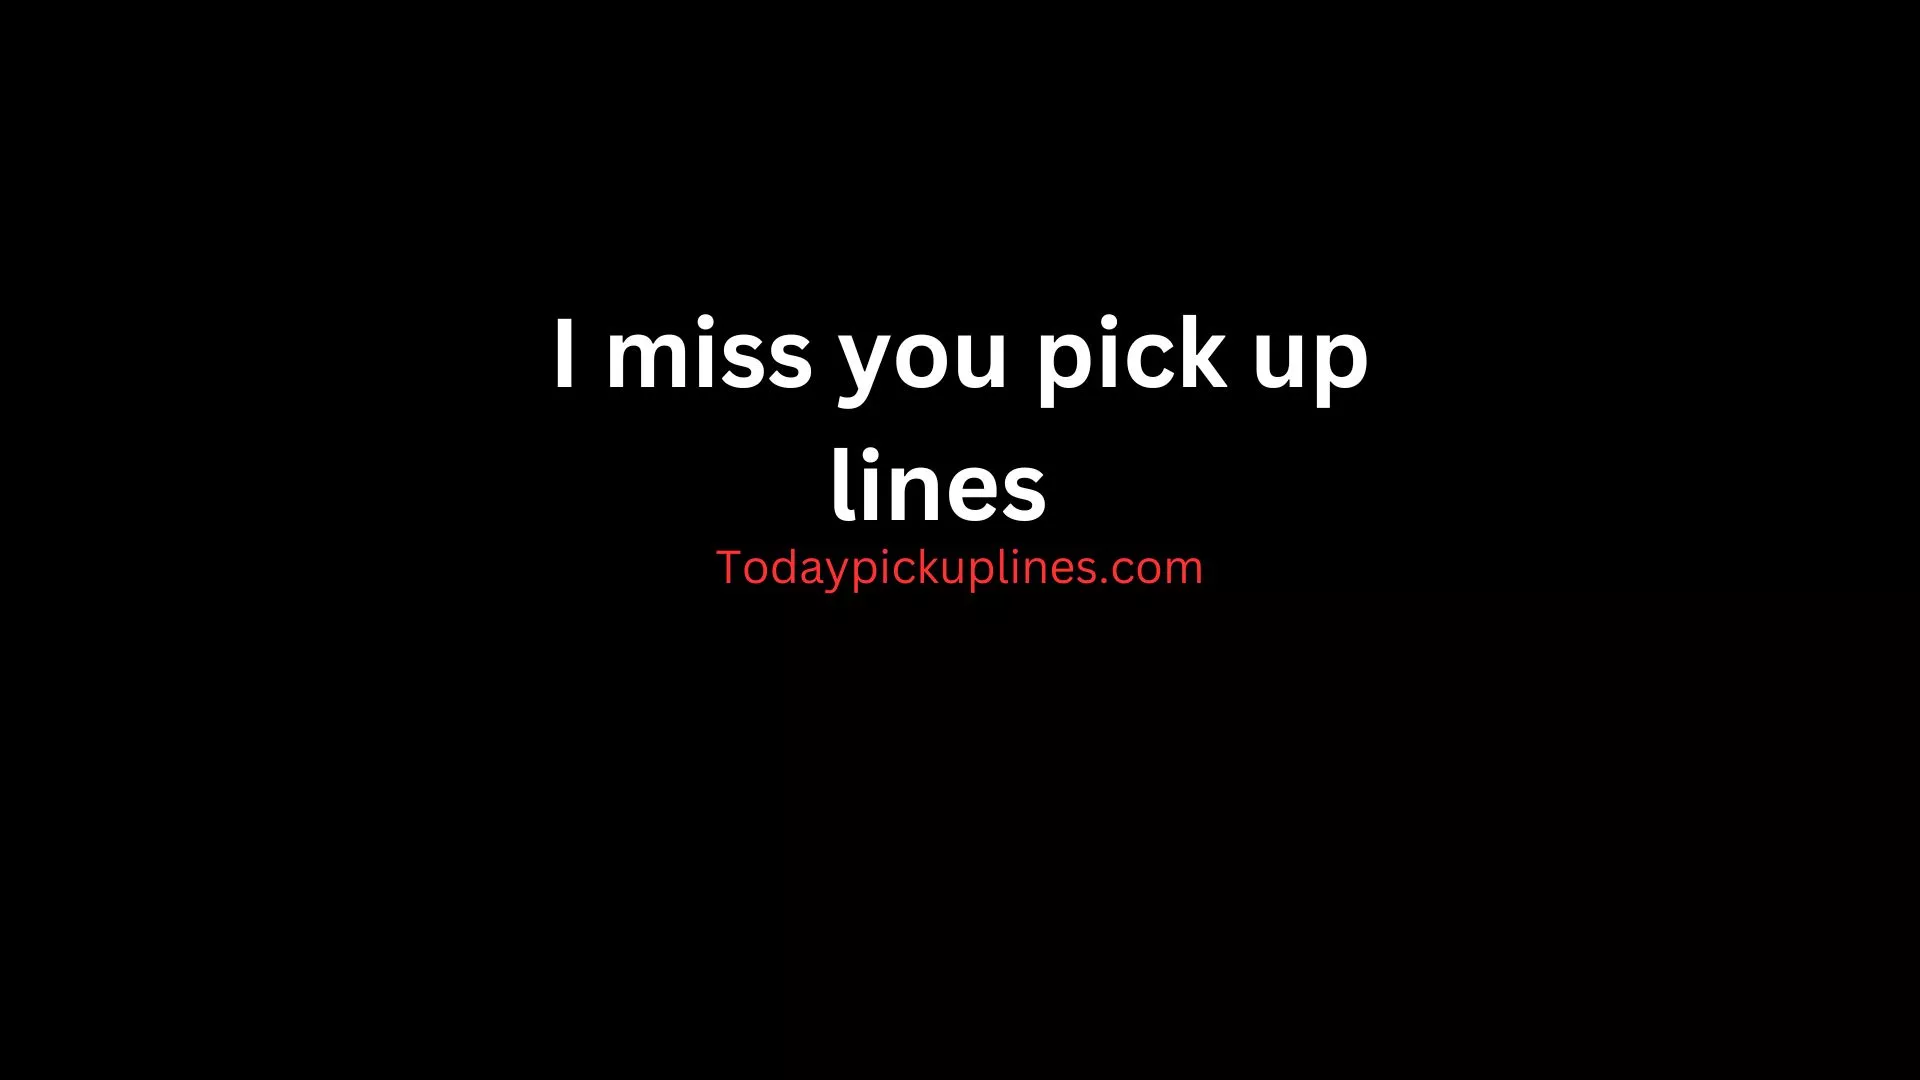 I miss you pick up lines